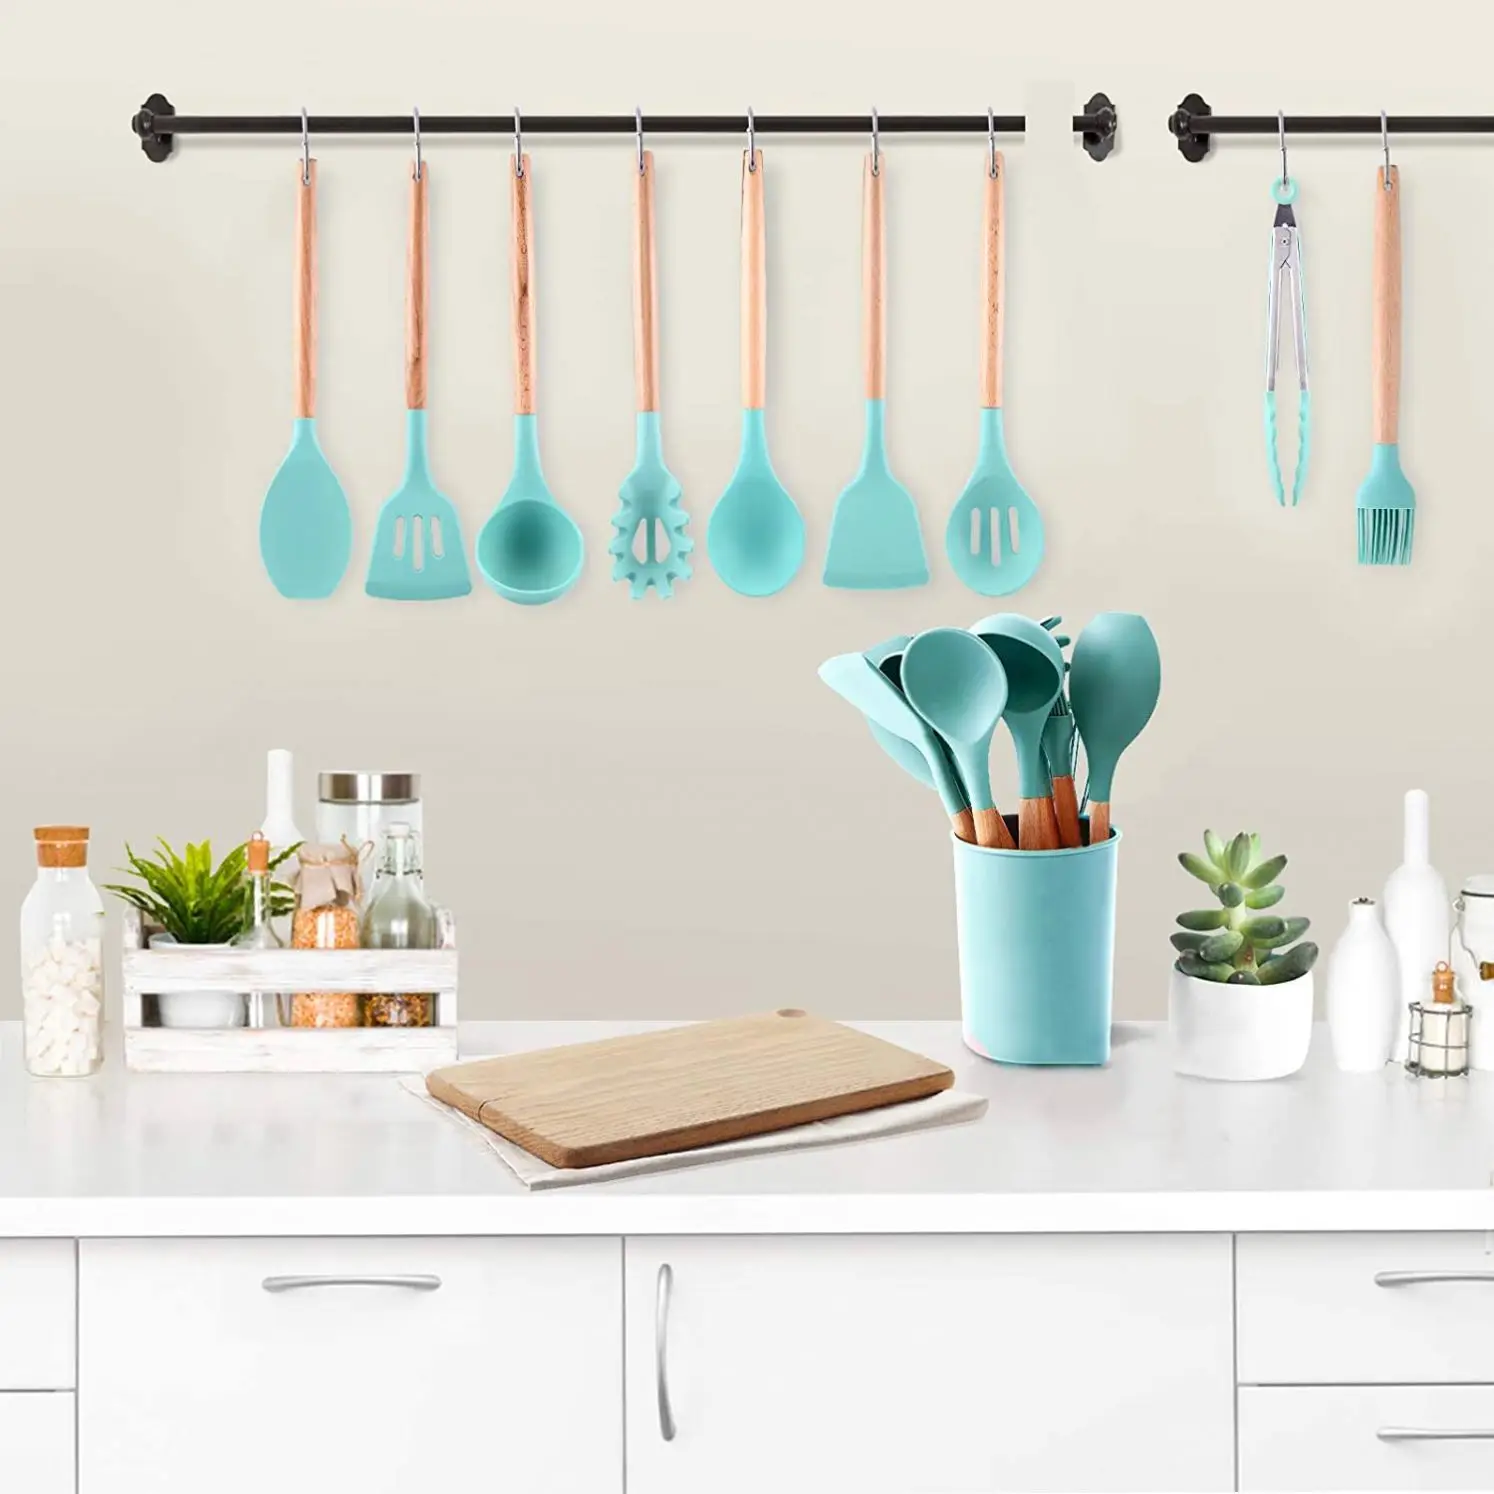 

Factory wholesale 12PCS kitchen cooking silicone utensil set with Storage bucket, Sky blue pink gray or custom